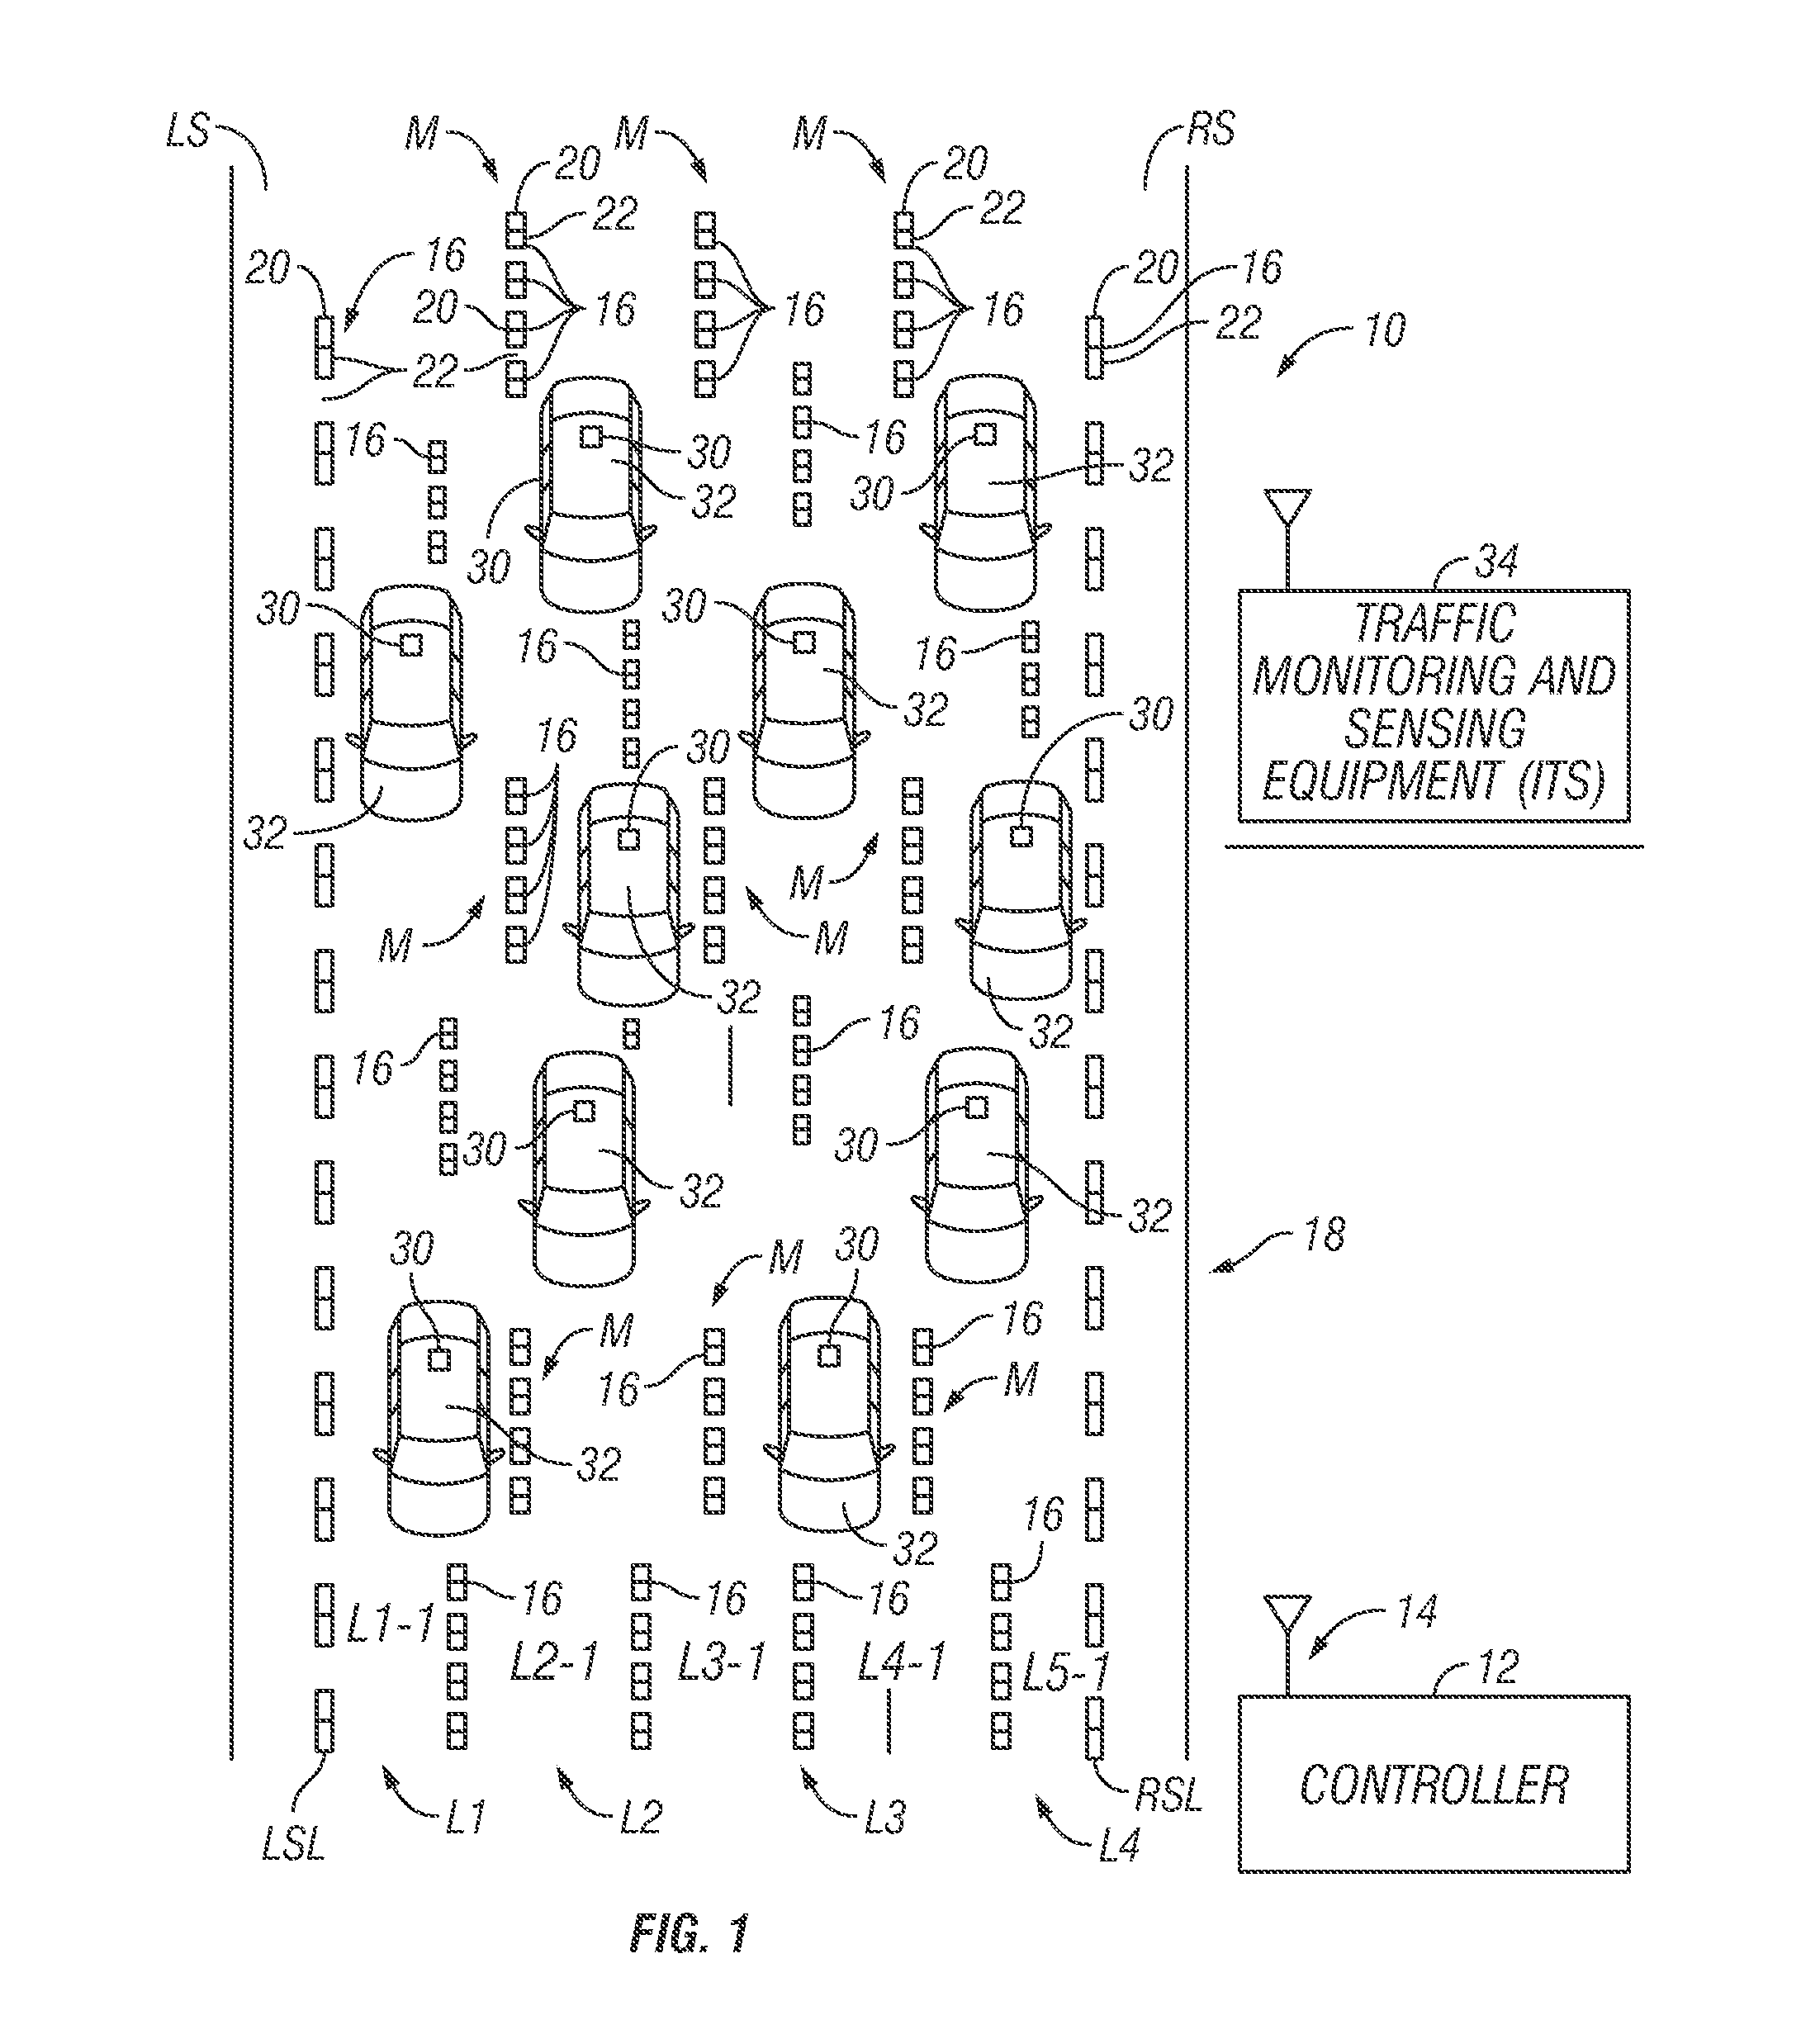 System and method for providing traffic congestion relief using dynamic lighted road lane markings